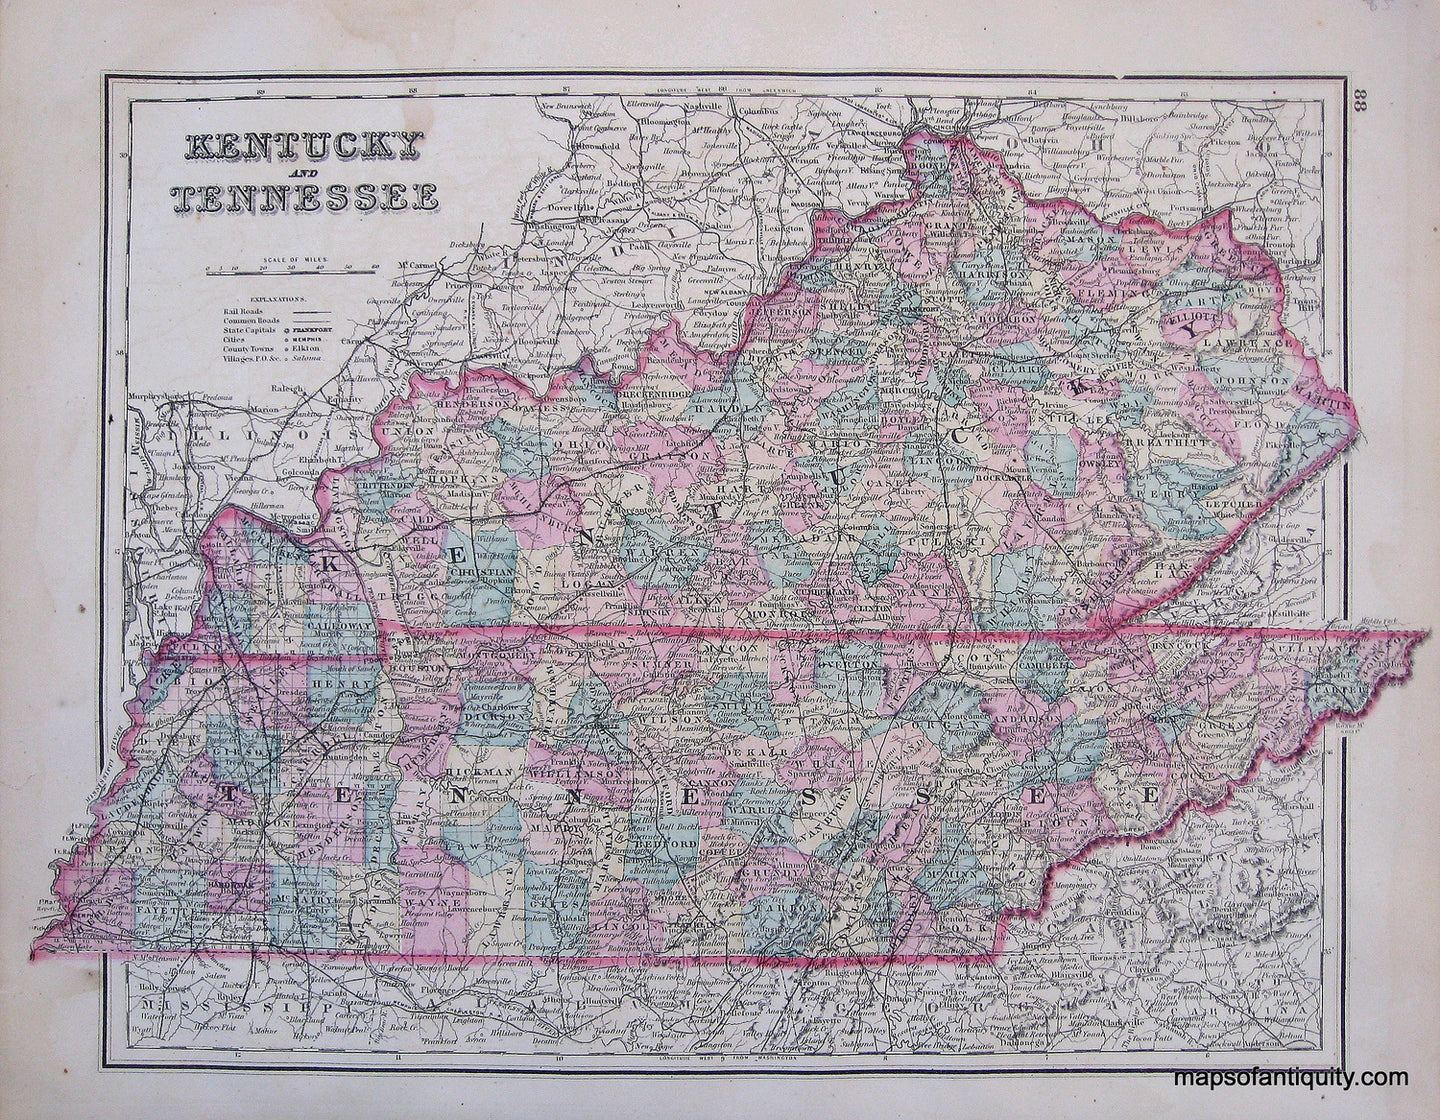 Antique-Hand-Colored-Map-Kentucky-and-Tennessee-******-United-States-Tennessee-1876-Gray-Maps-Of-Antiquity